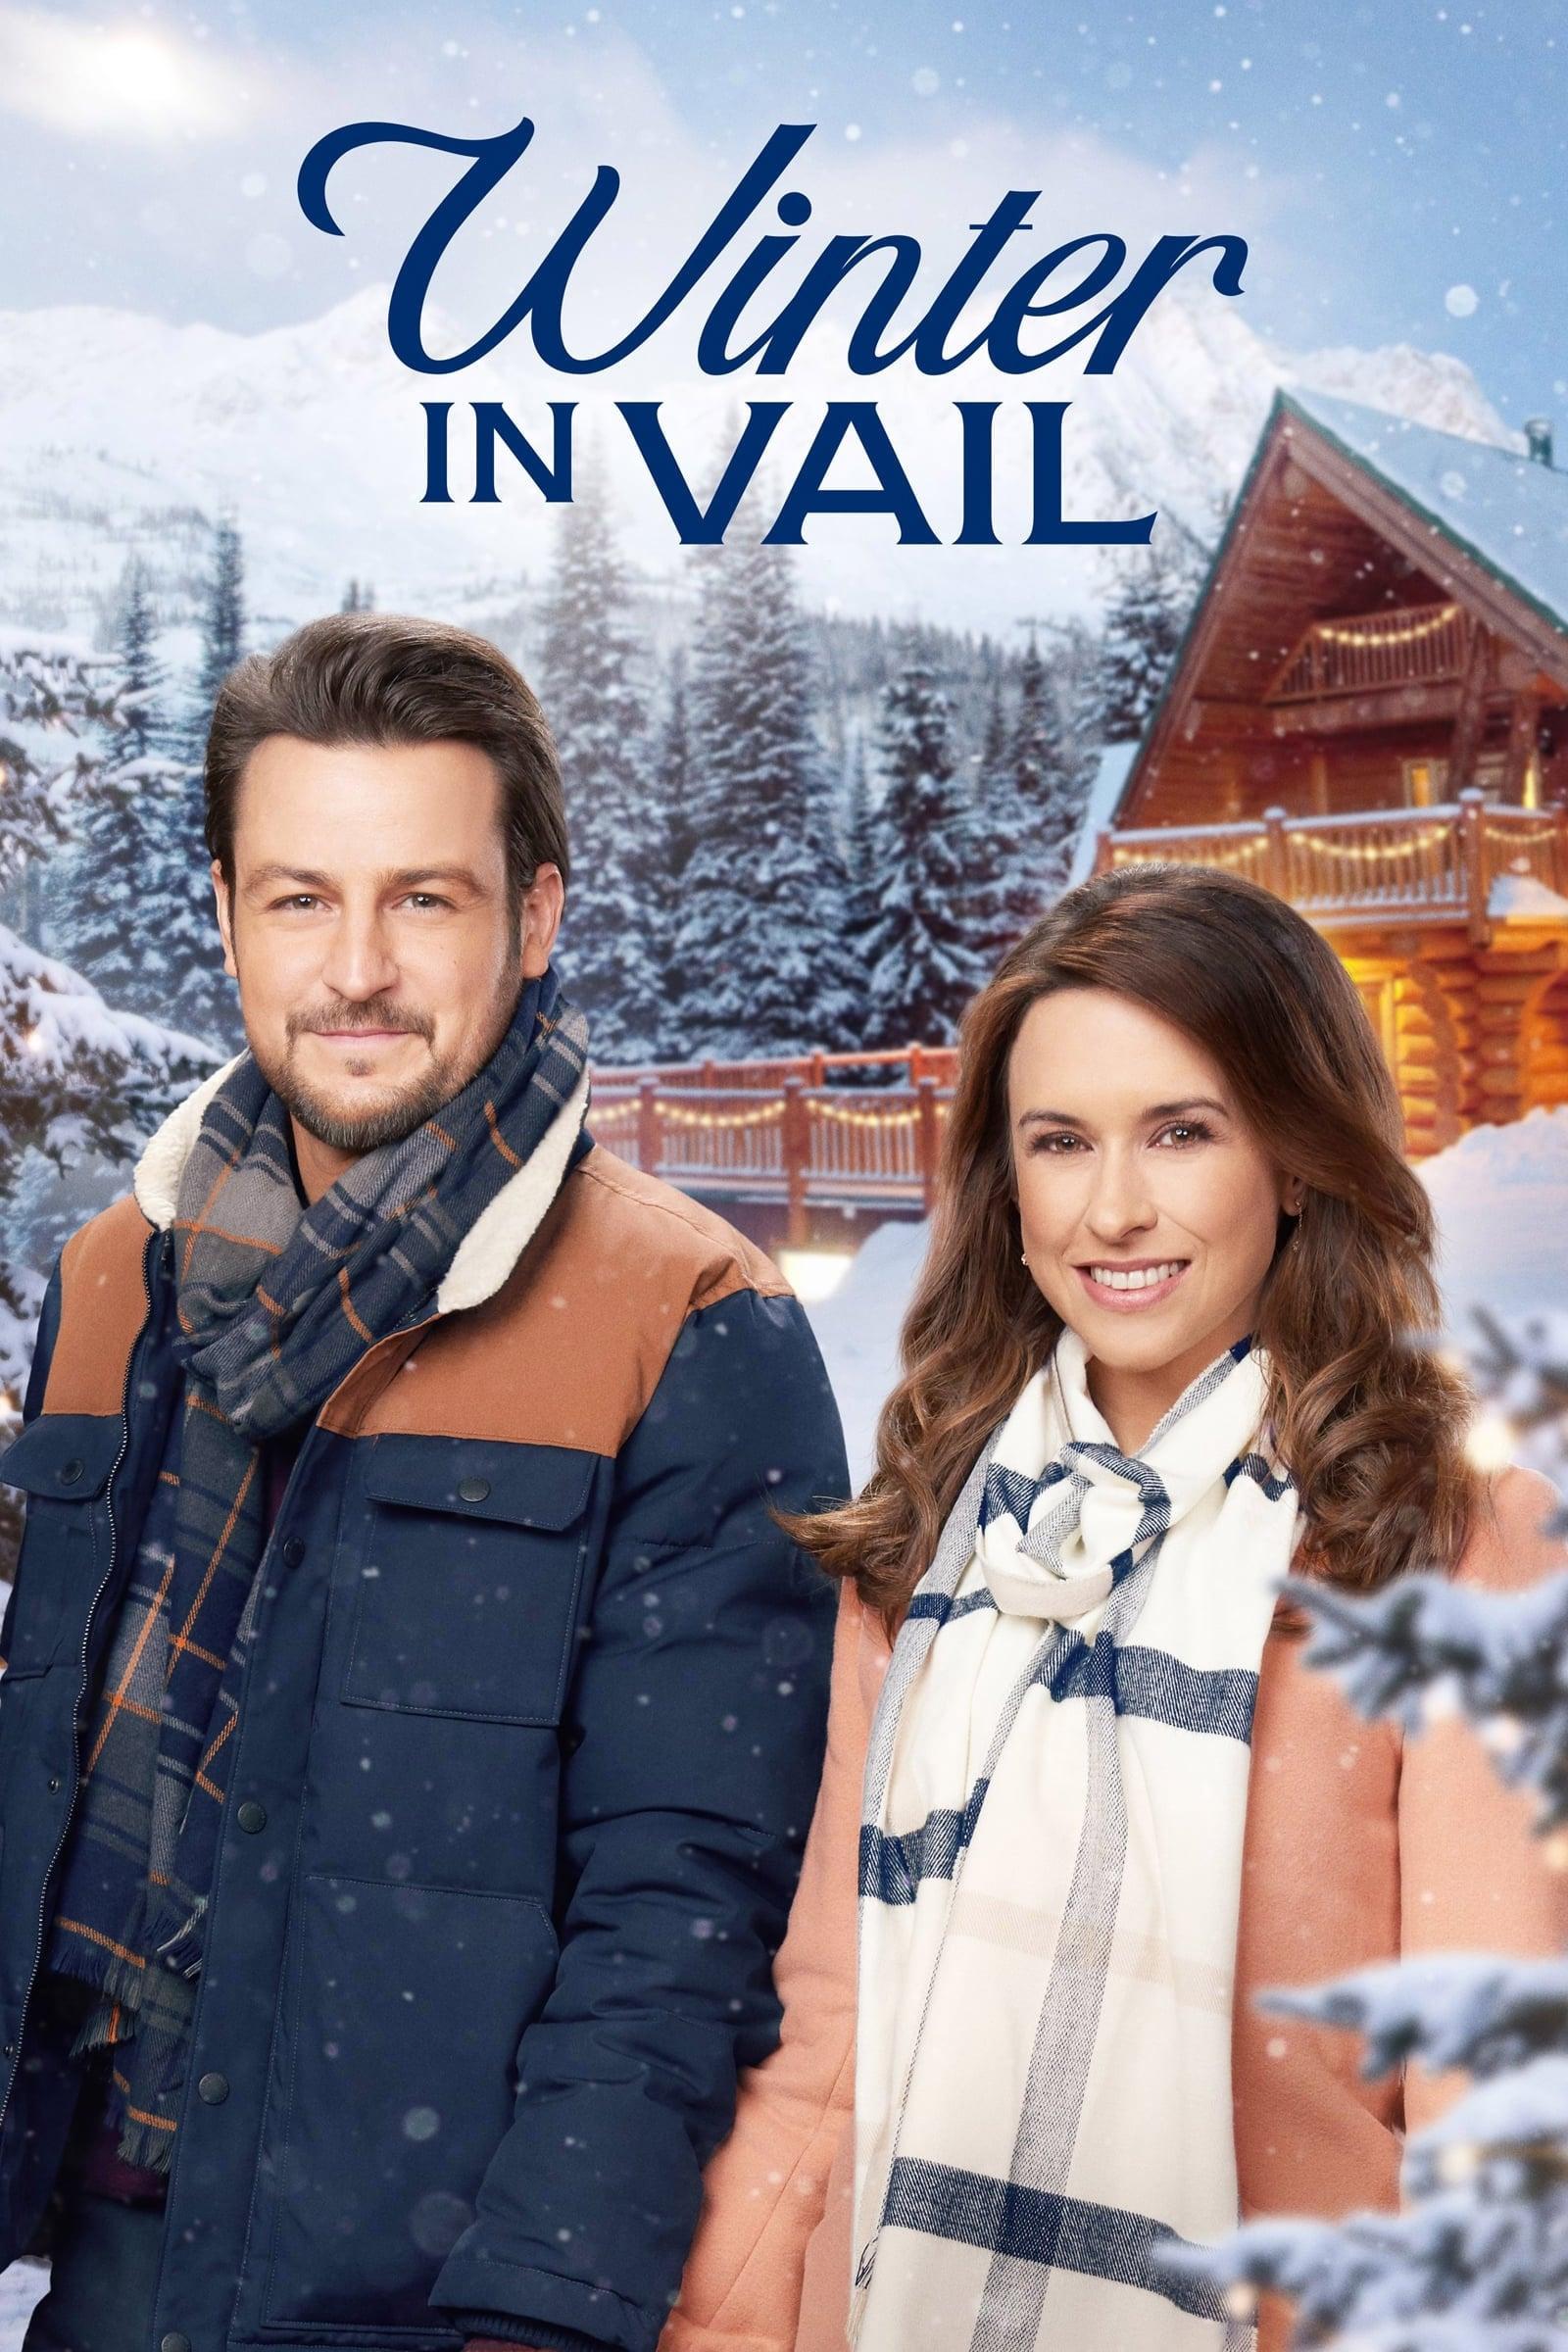 Winter in Vail poster